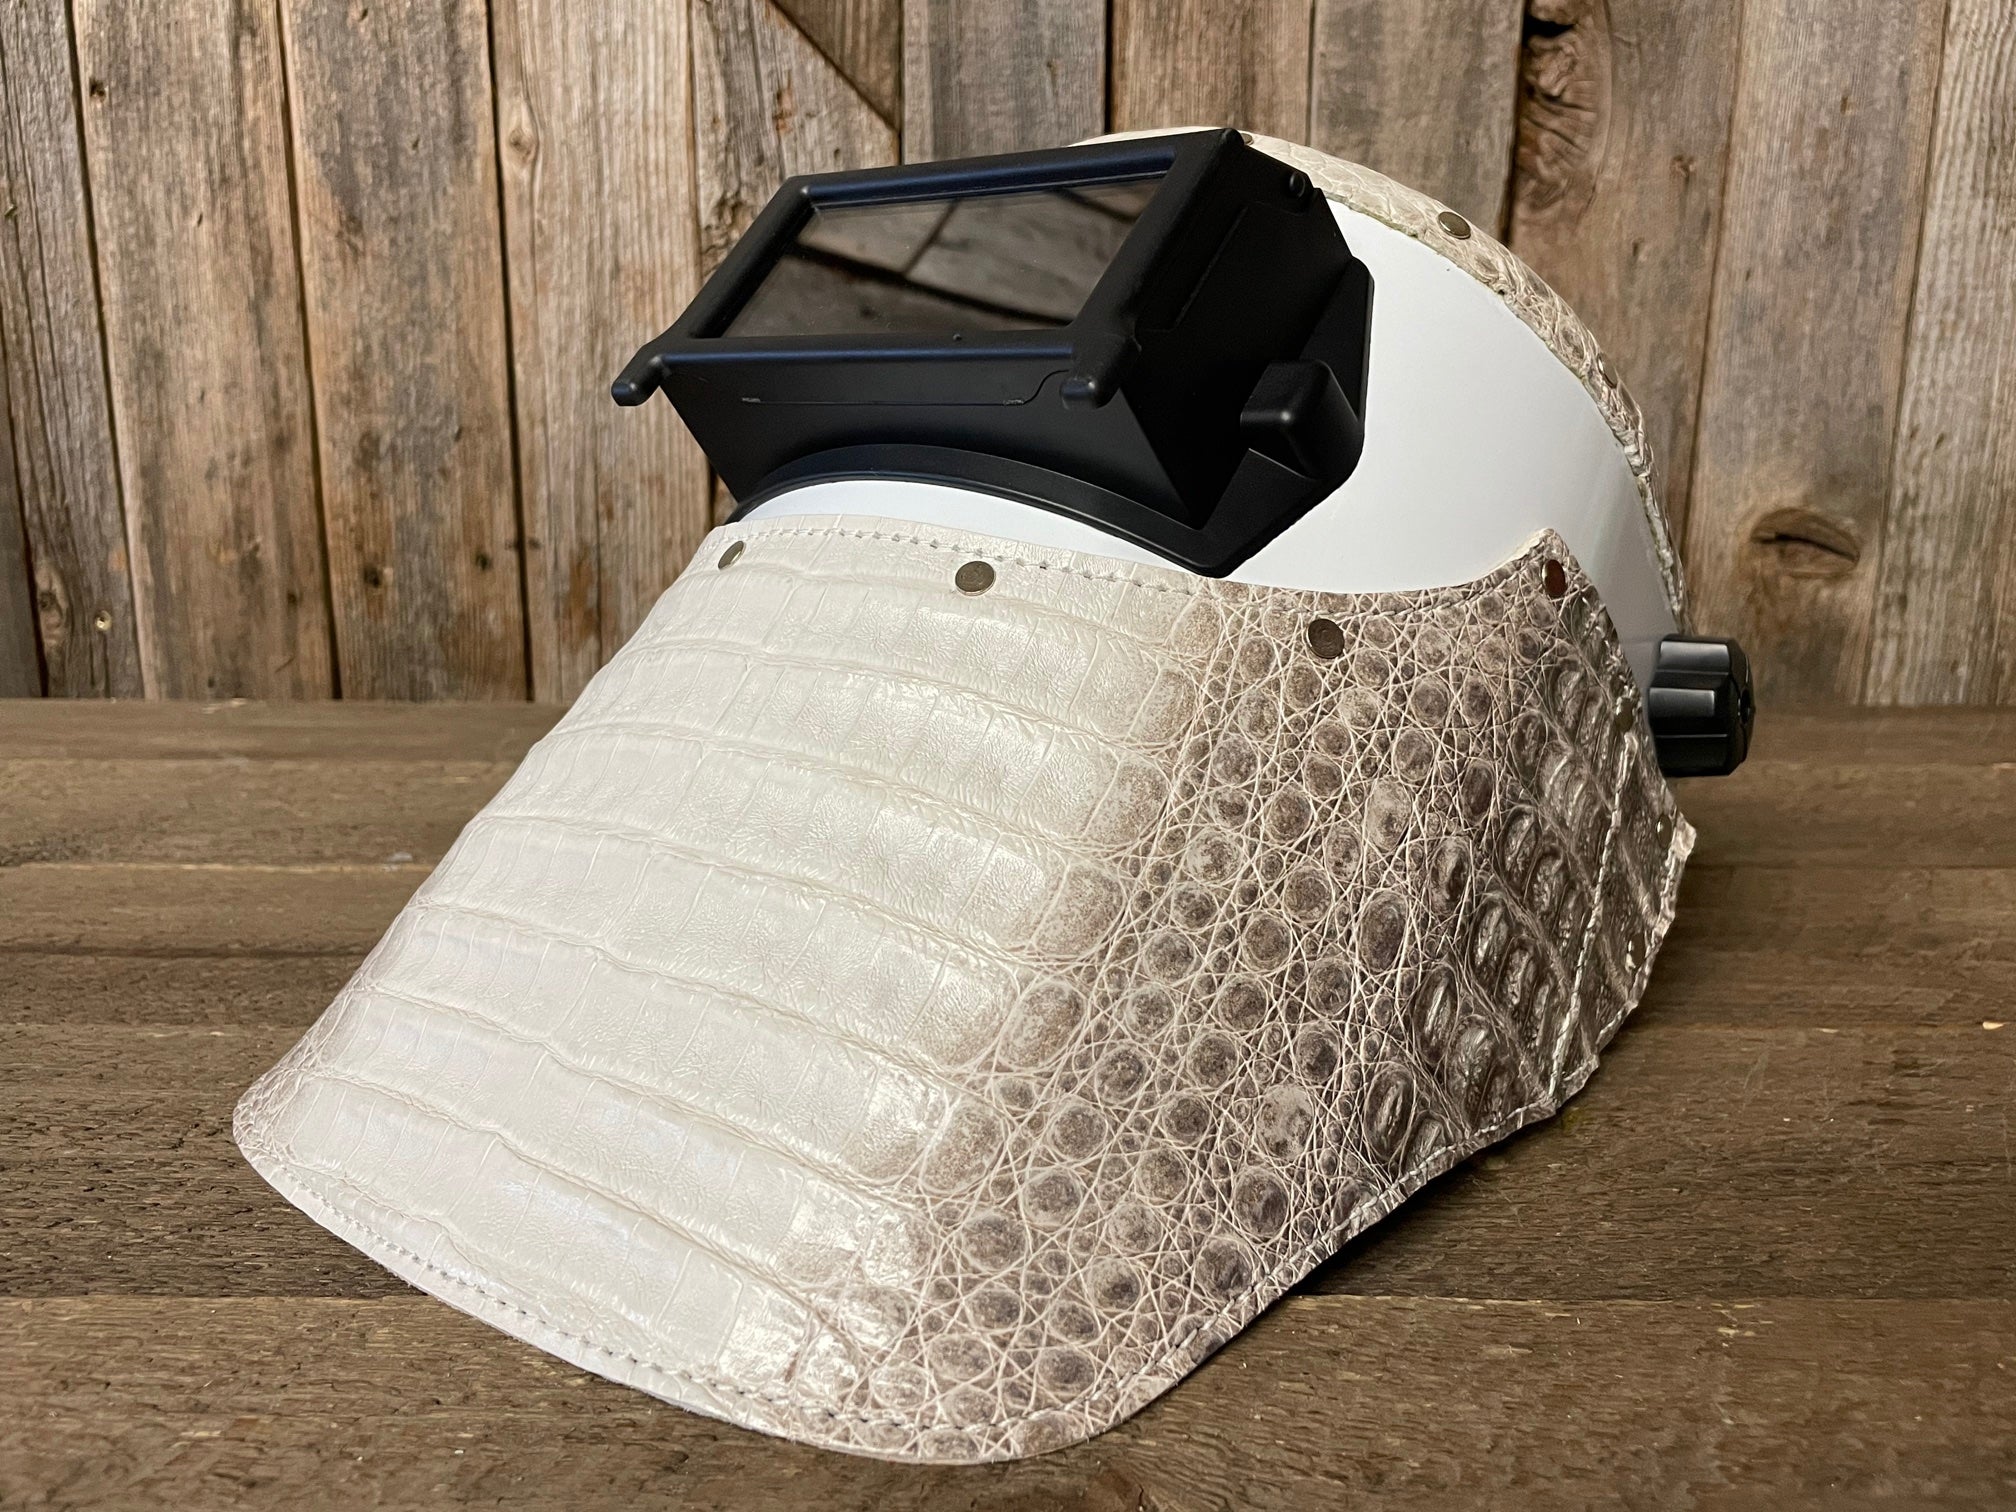 Outlaw Leather - Welding Hood - White Caiman